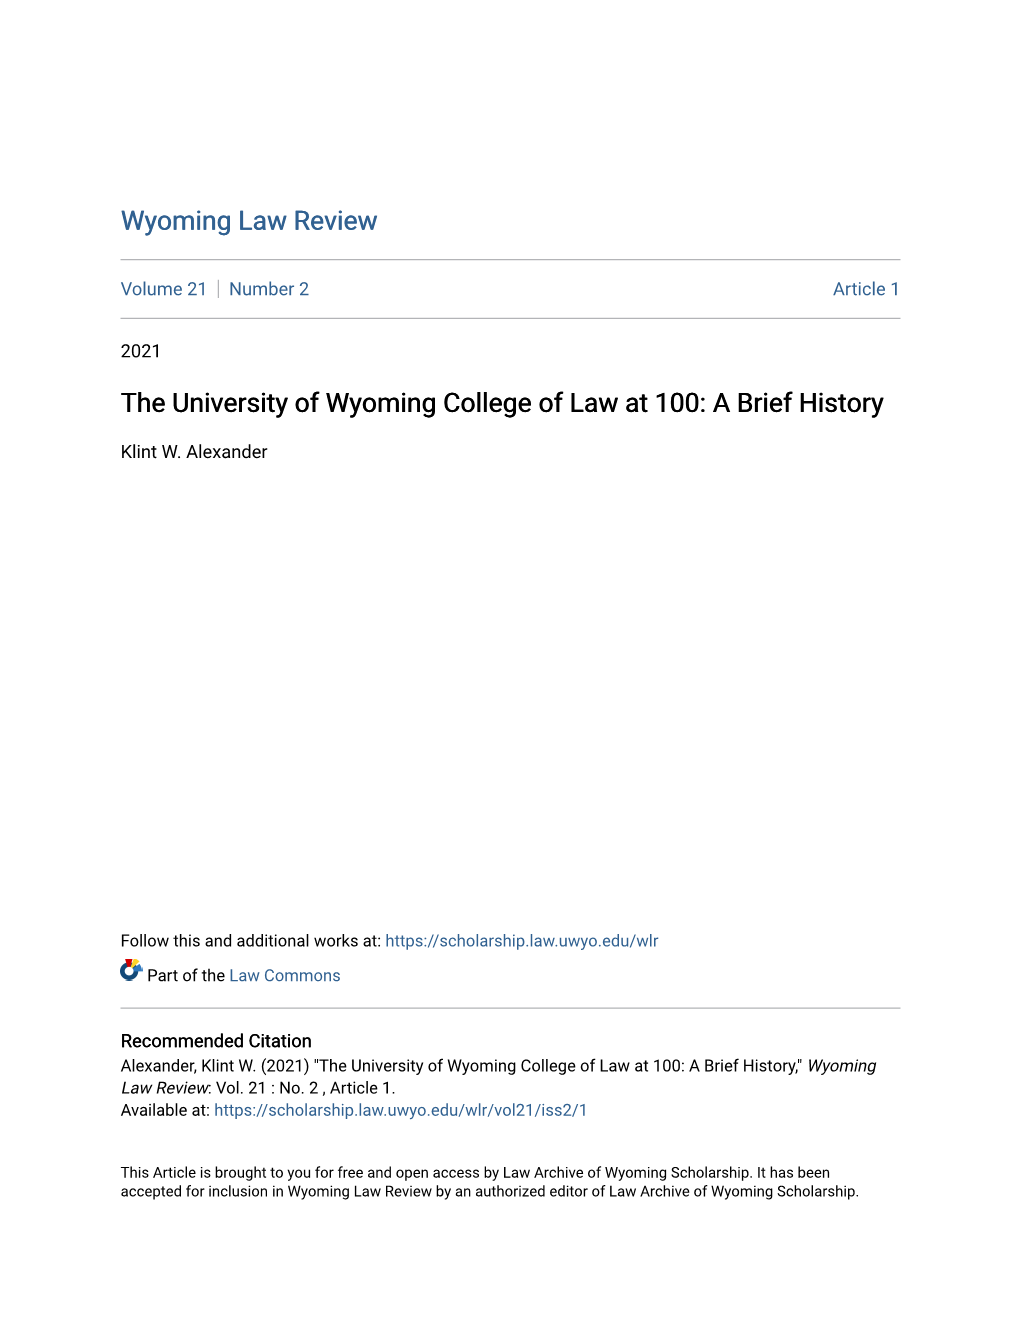 The University of Wyoming College of Law at 100: a Brief History